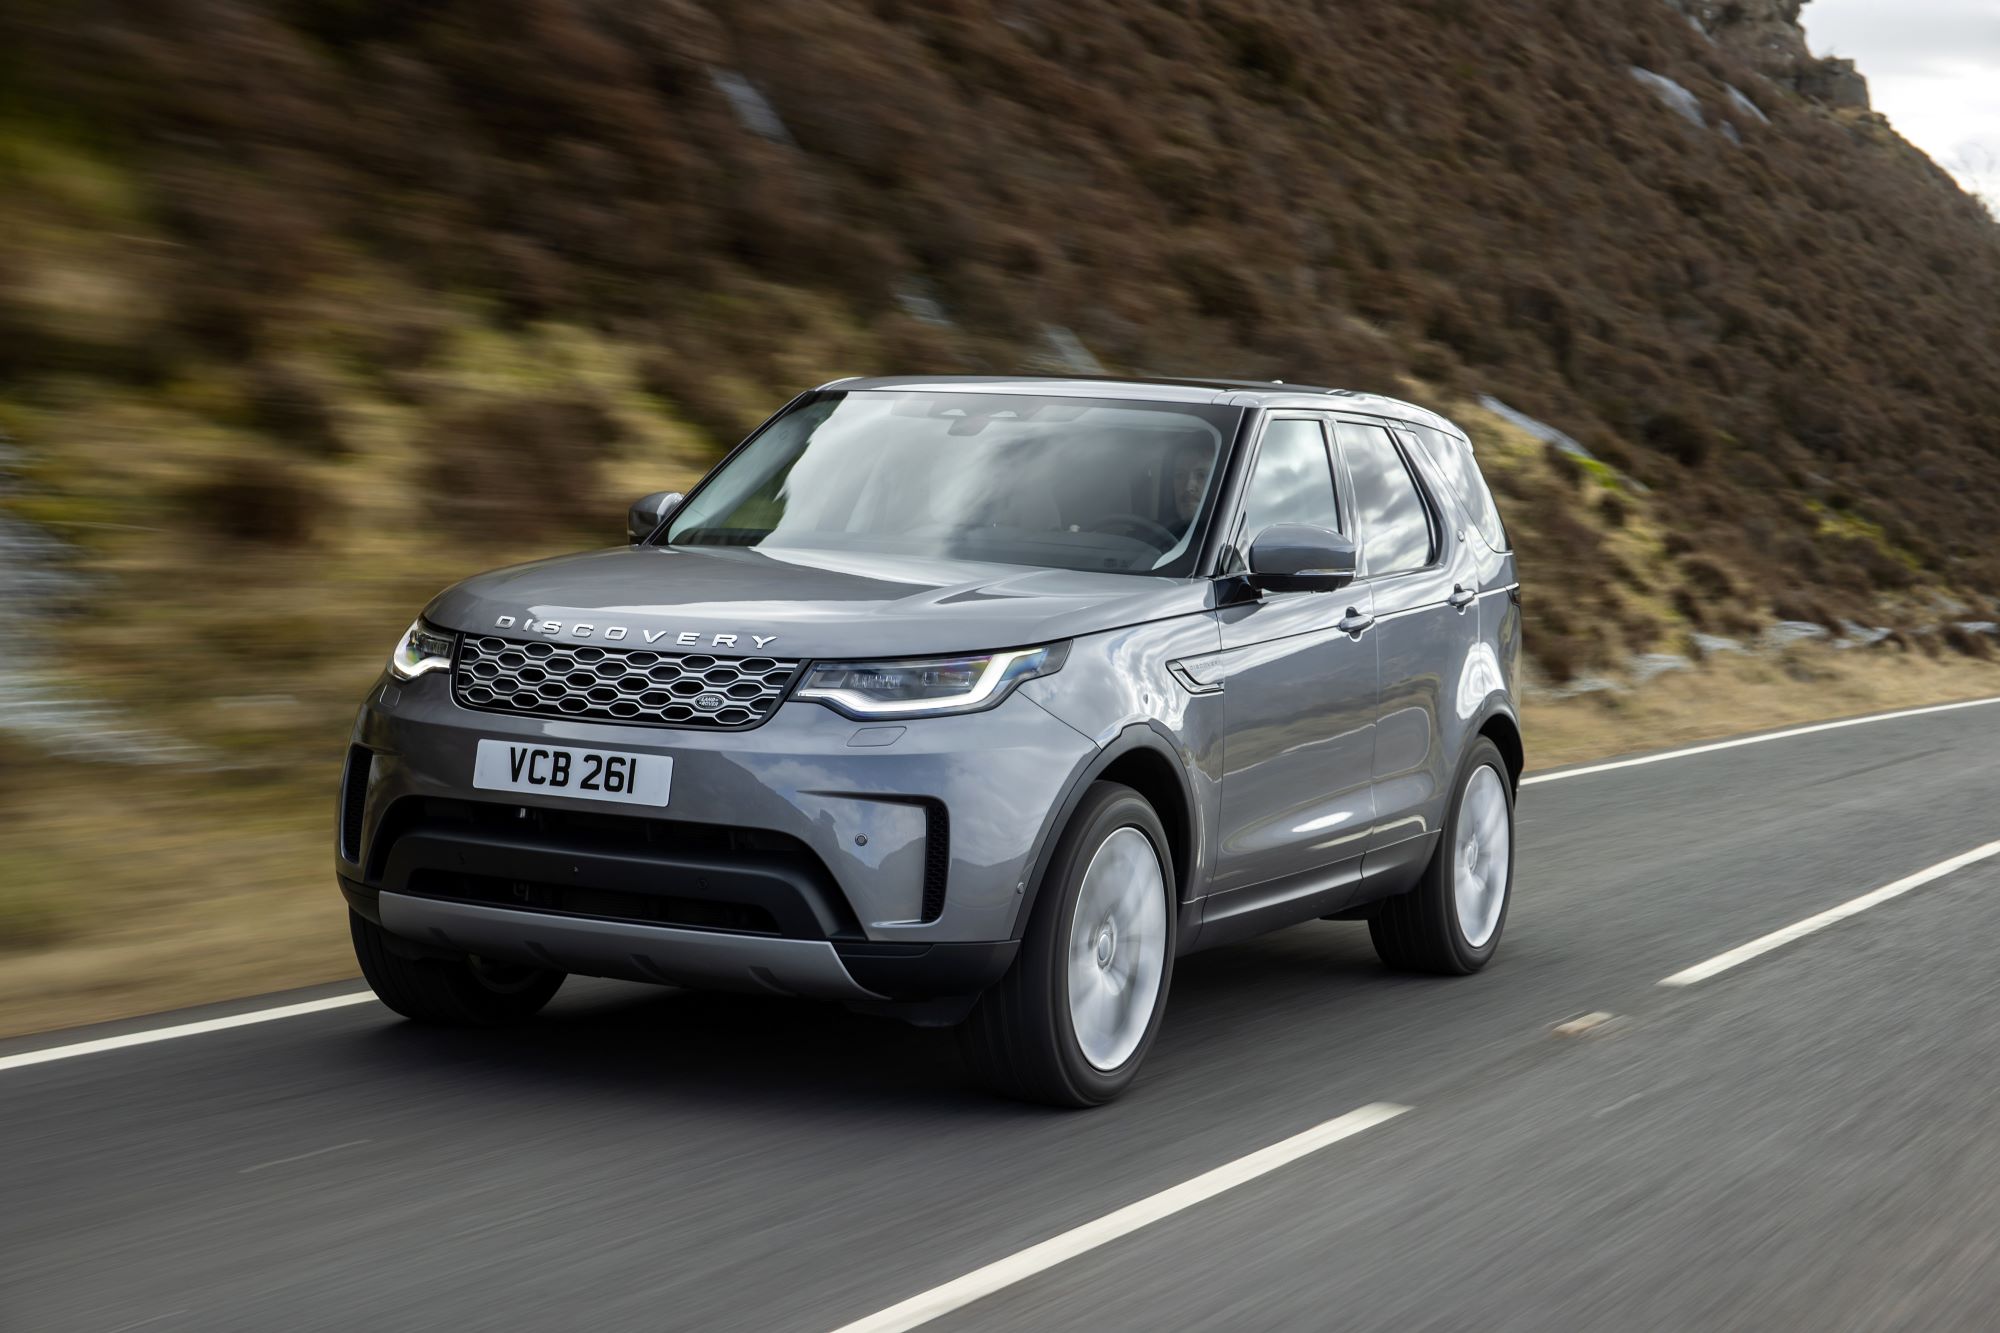 The Land Rover Discovery MHEV model driving on a country highway